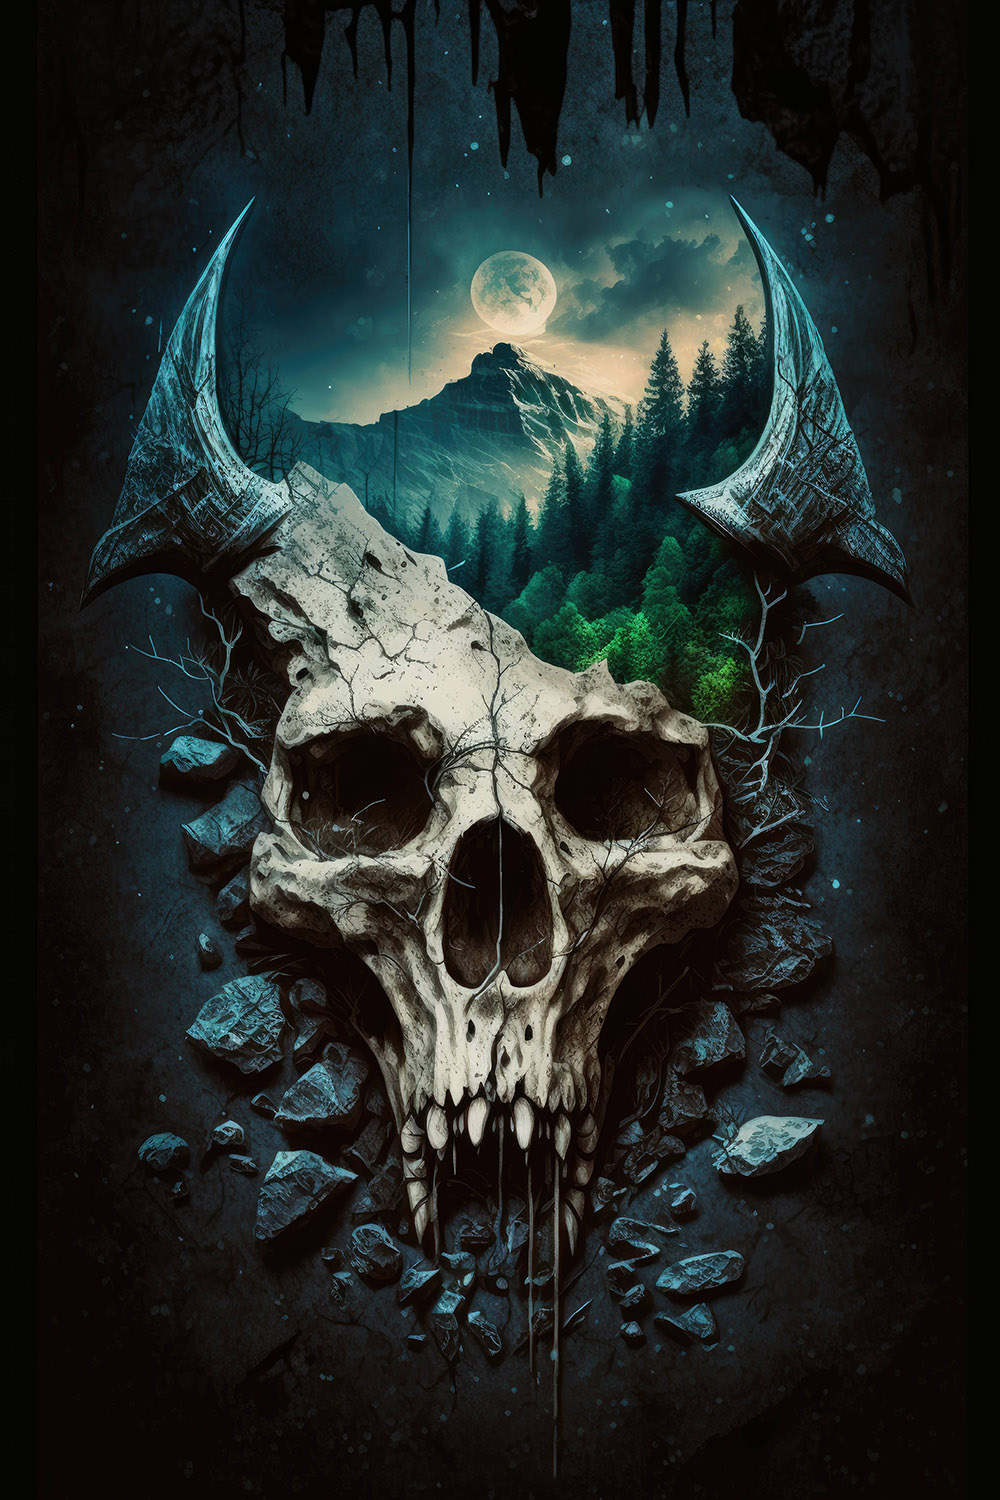 Fantasy skull in the middle pinterest preview image.